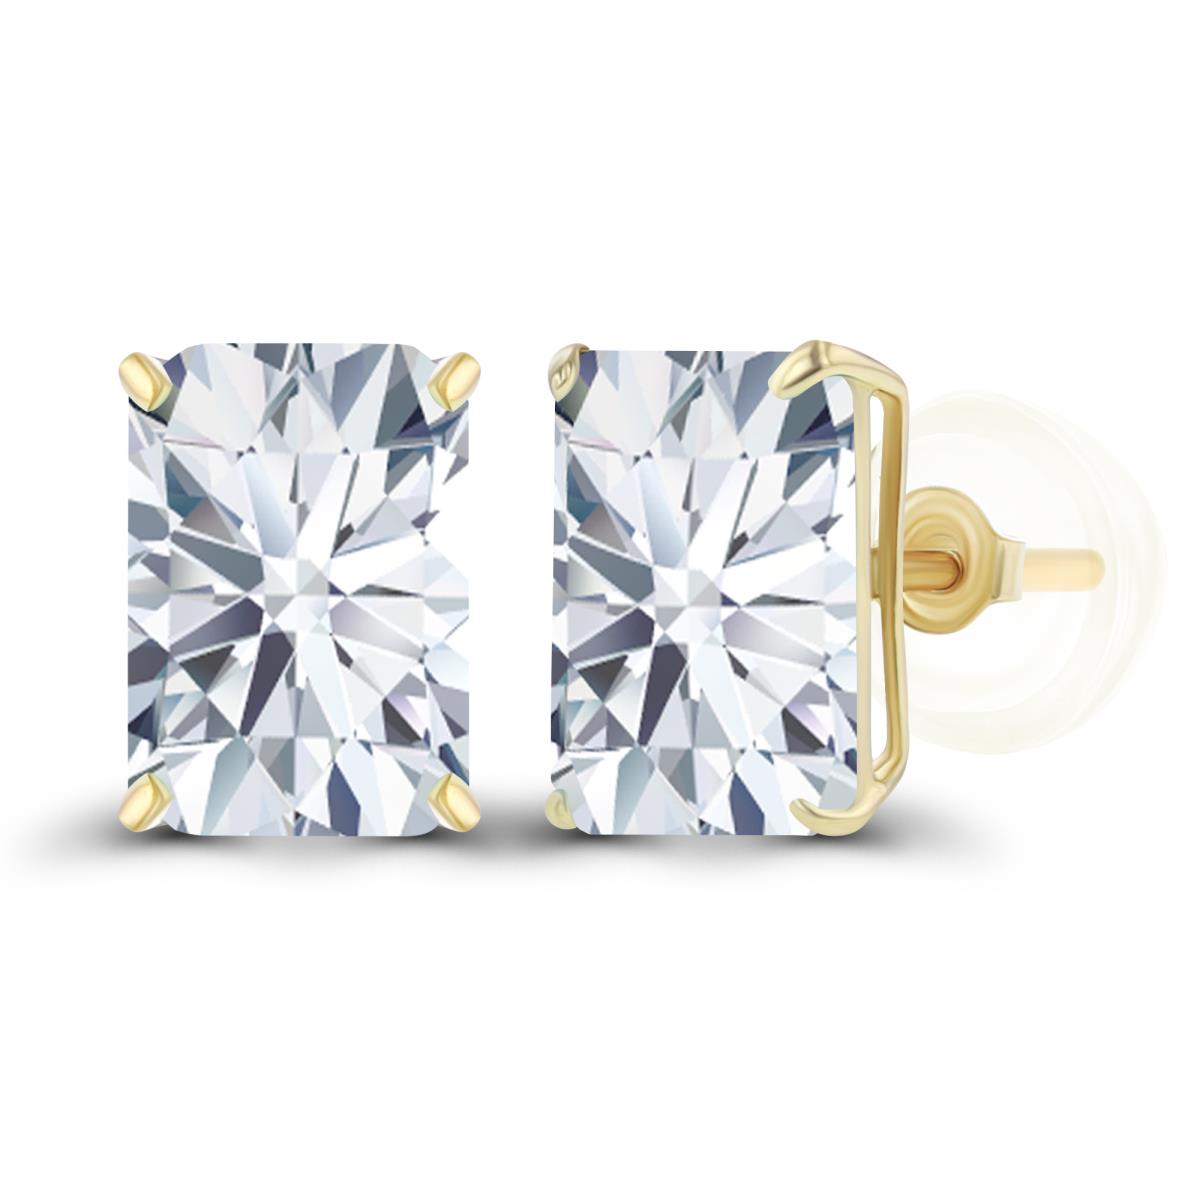 10K Yellow Gold 7x5mm Octagon Created White Sapphire Basket Stud Earrings with Silicone Backs